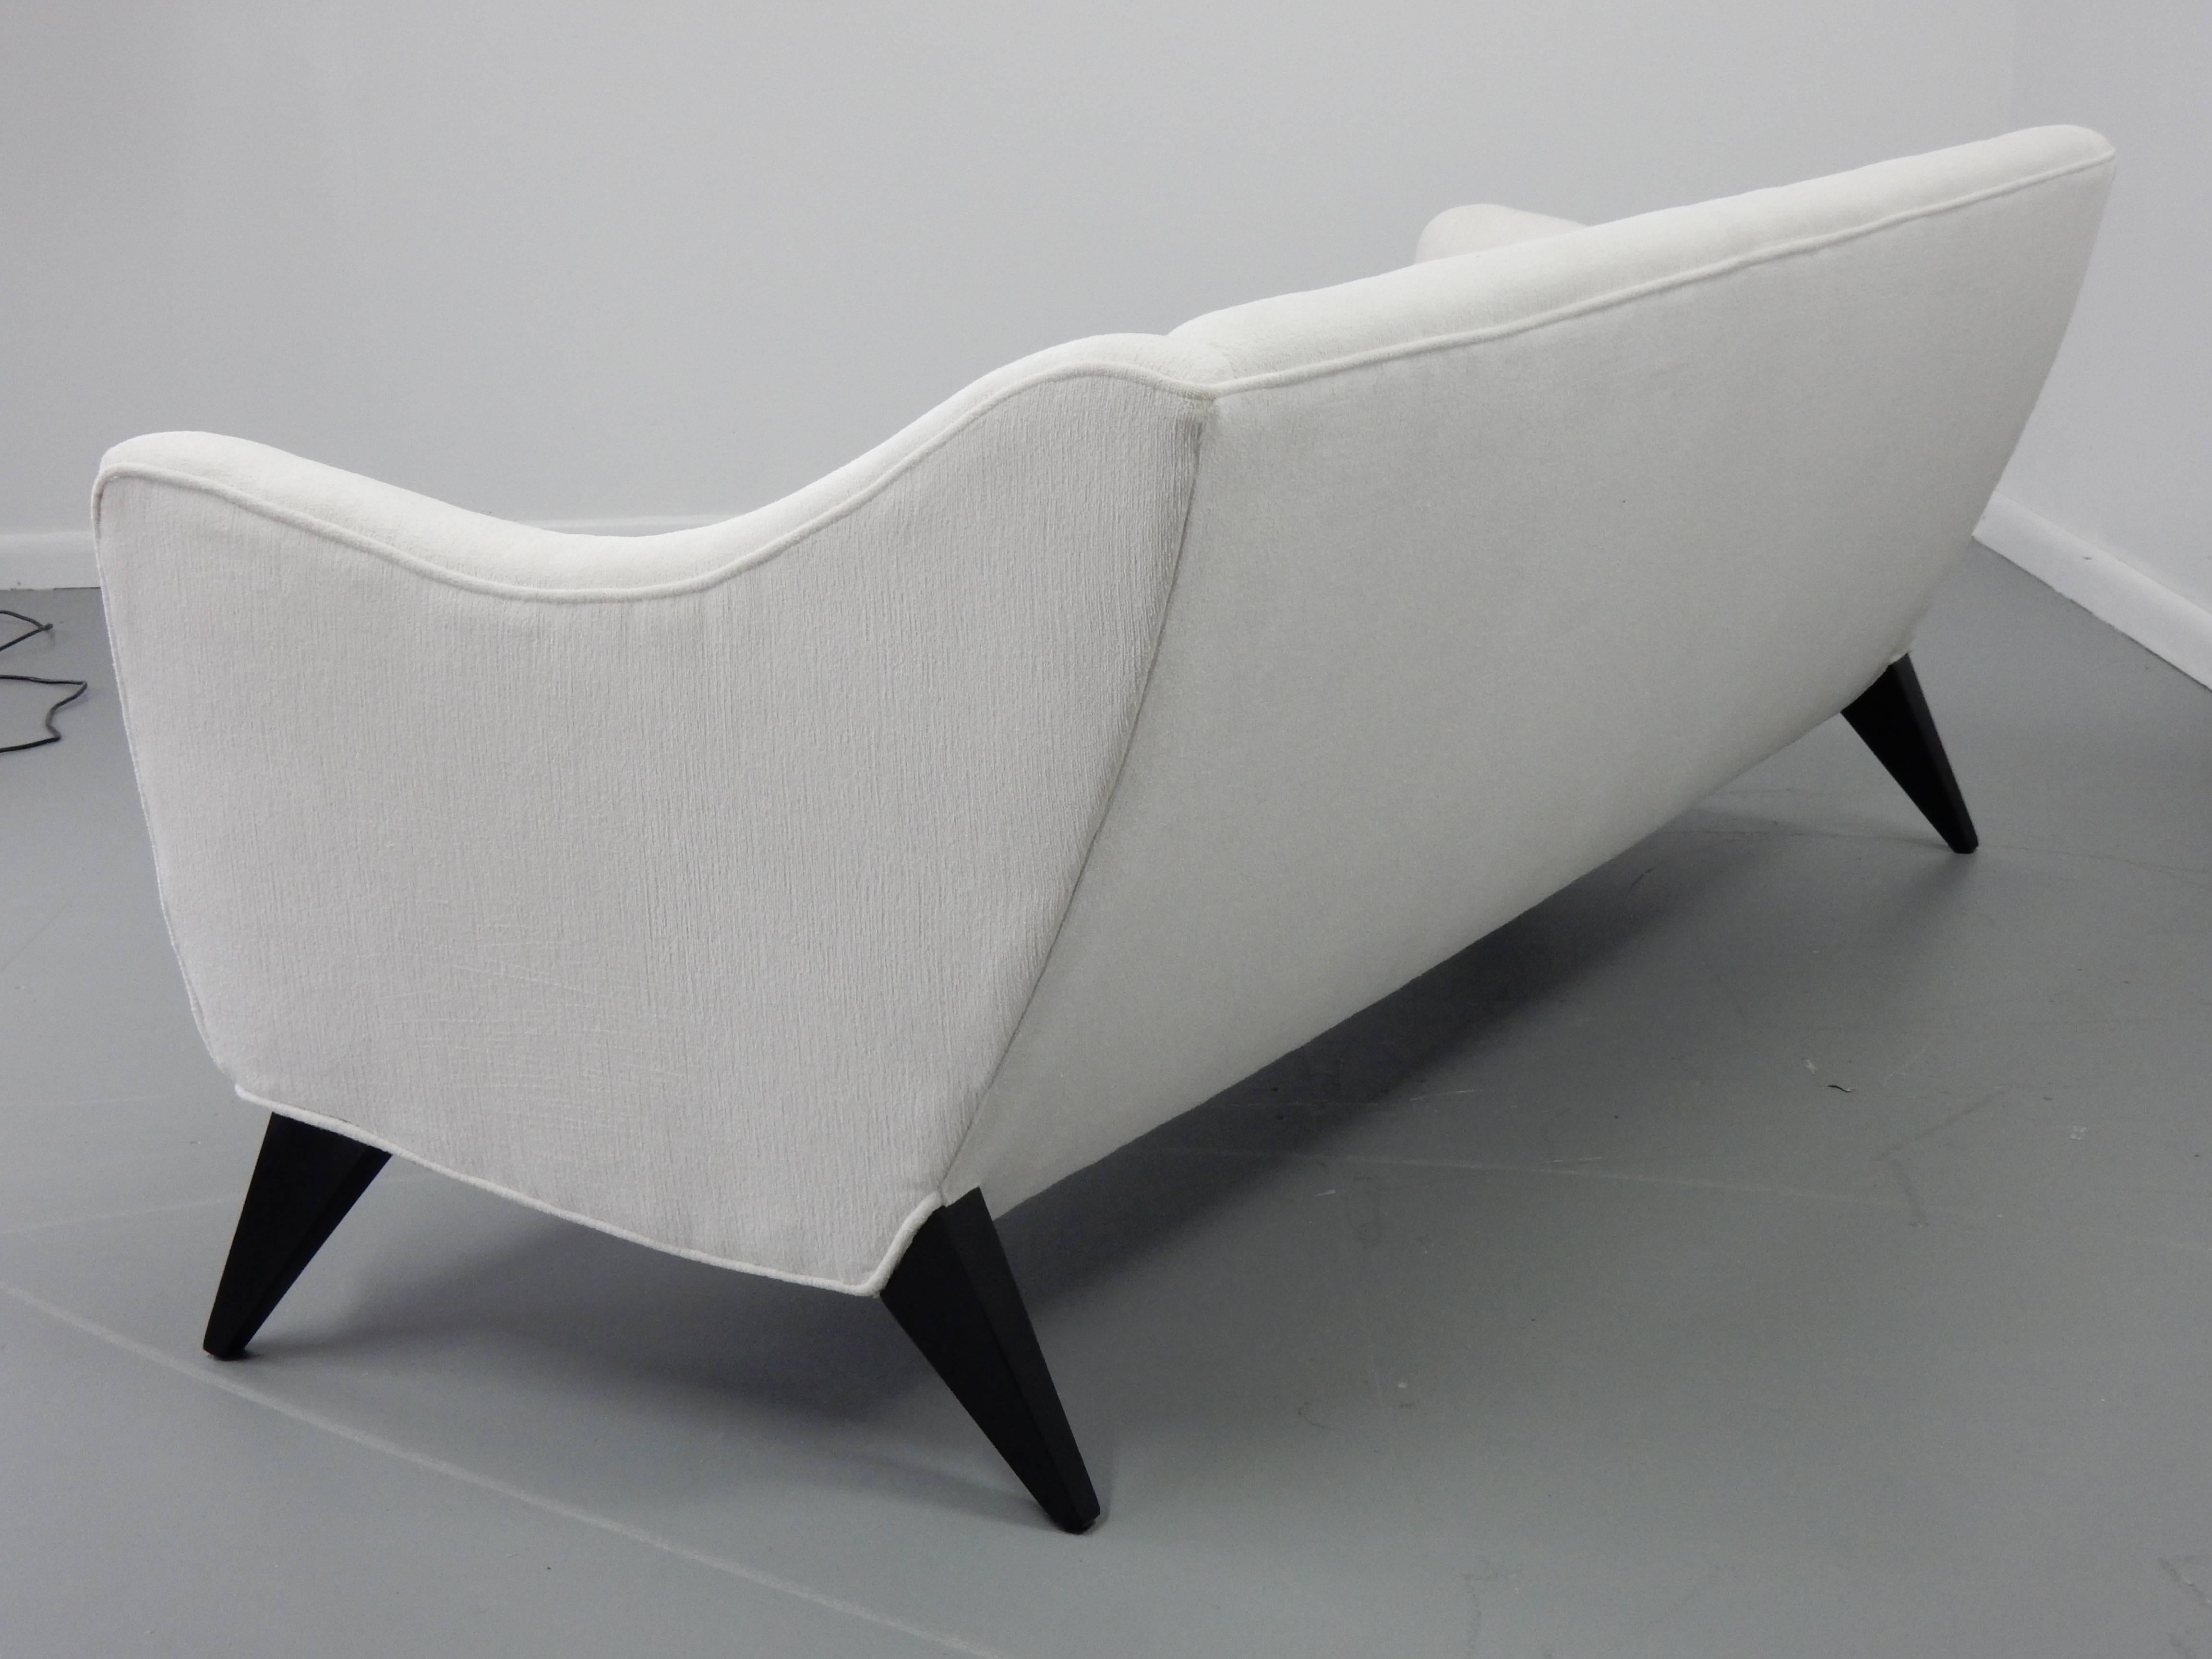 This 1950s Italian sofa has been through a ground up restoration; we've ebonized the legs and upholstered this voluptuous shaped piece in a lovely white textured velvet.